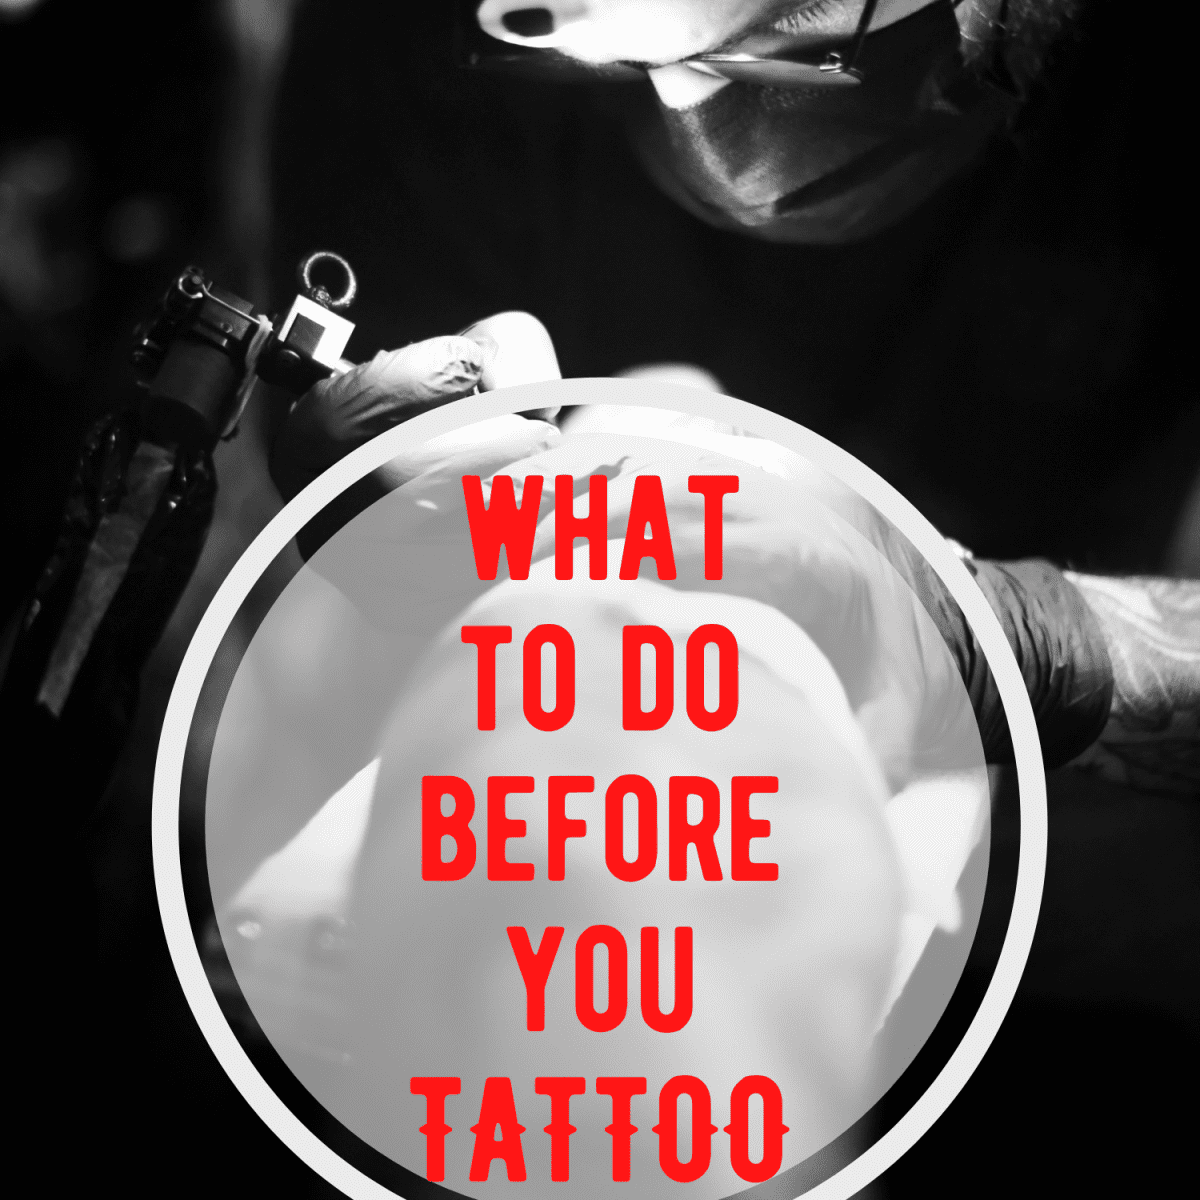 Getting a Tattoo: What to Expect, Pain Tips, Checklist, Aftercare